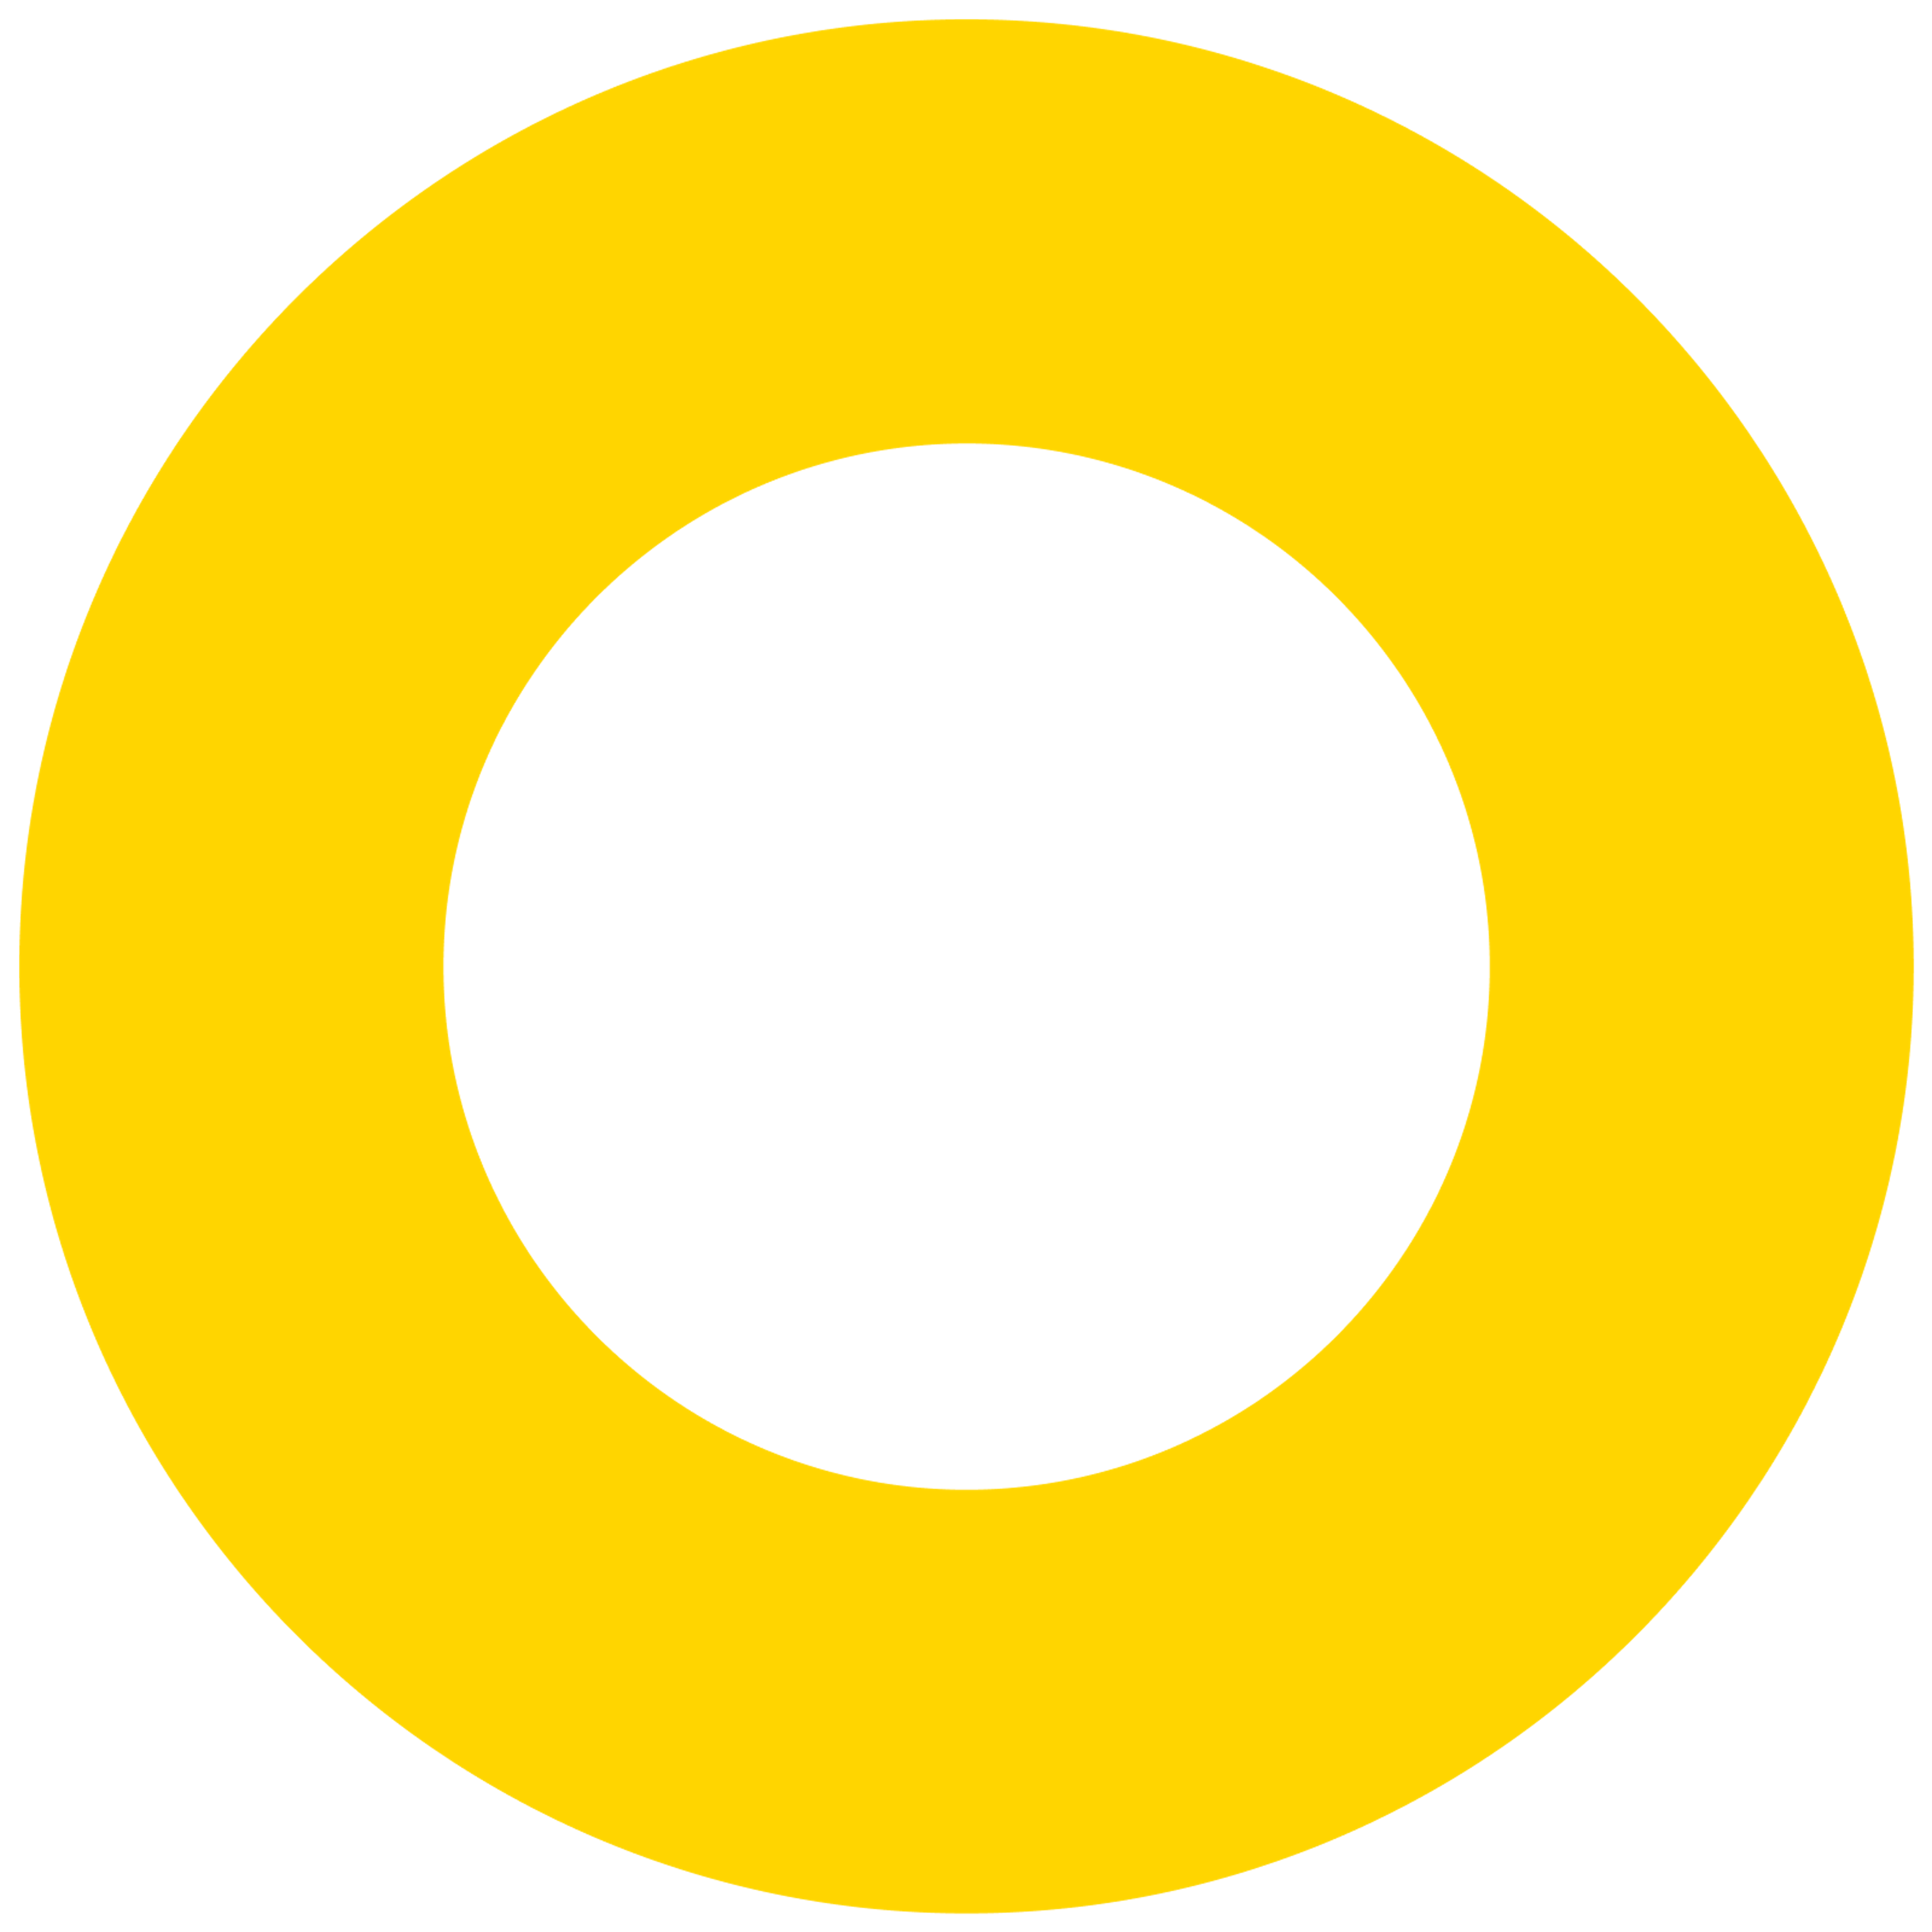 A yellow circle on a transparent background